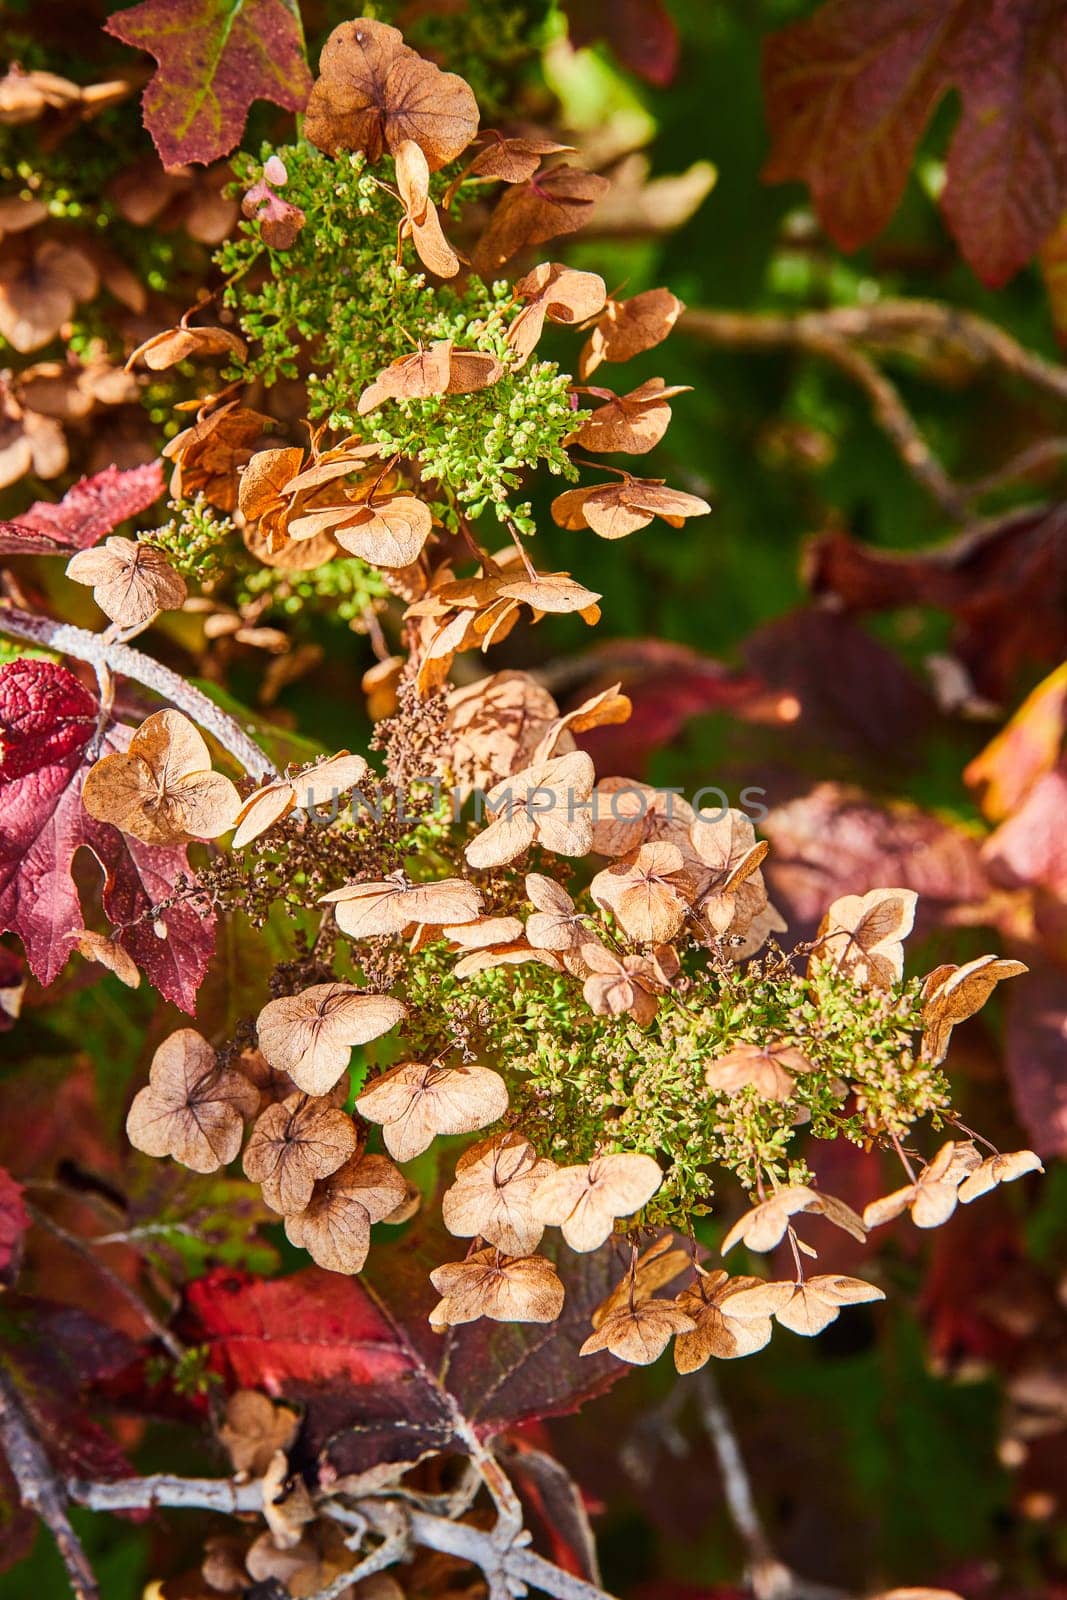 Autumn Transition of Hydrangea: Dried Flowers and Colorful Leaves Close-Up by njproductions